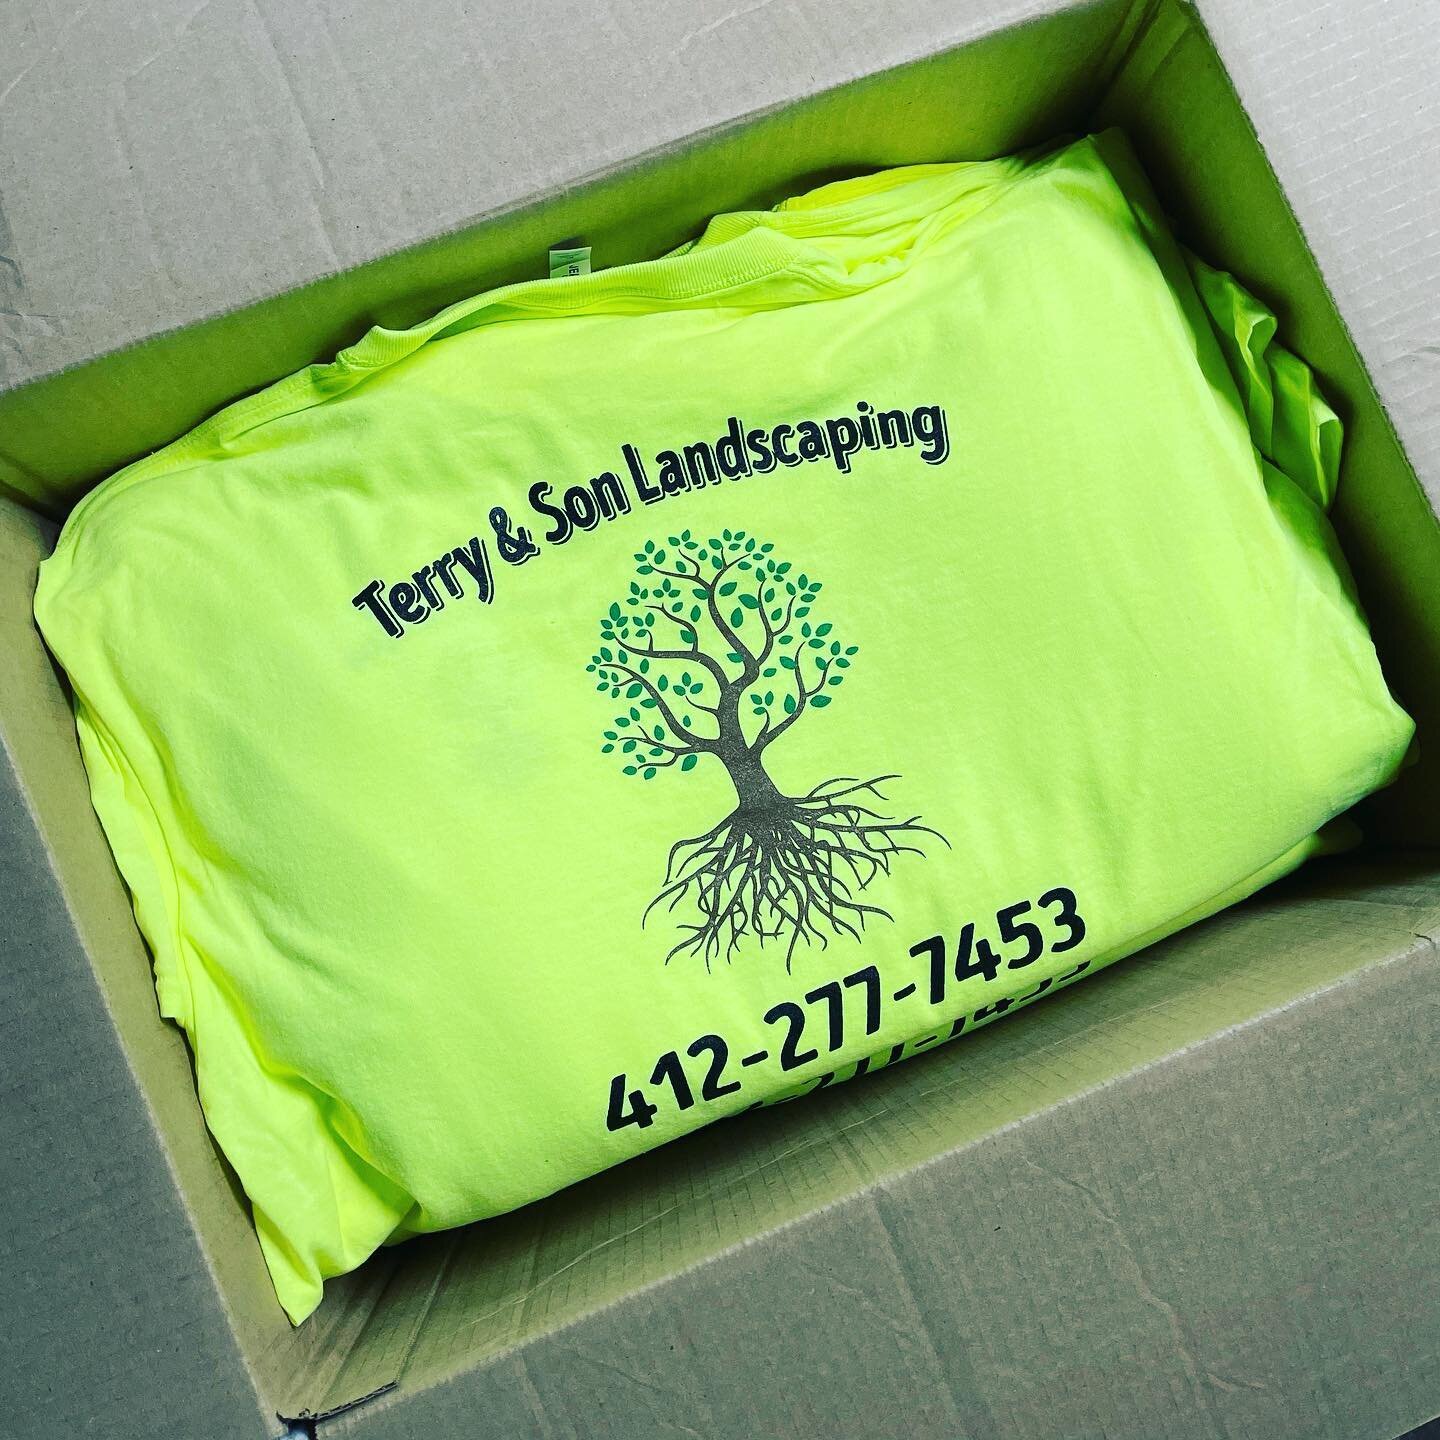 Haven&rsquo;t posted in a while. We&rsquo;ve been busy! Contact us for a quote today. 

#screenprinting #pittsburgh #customshirts #landscape #shirts #benchmarkshirts #instagram